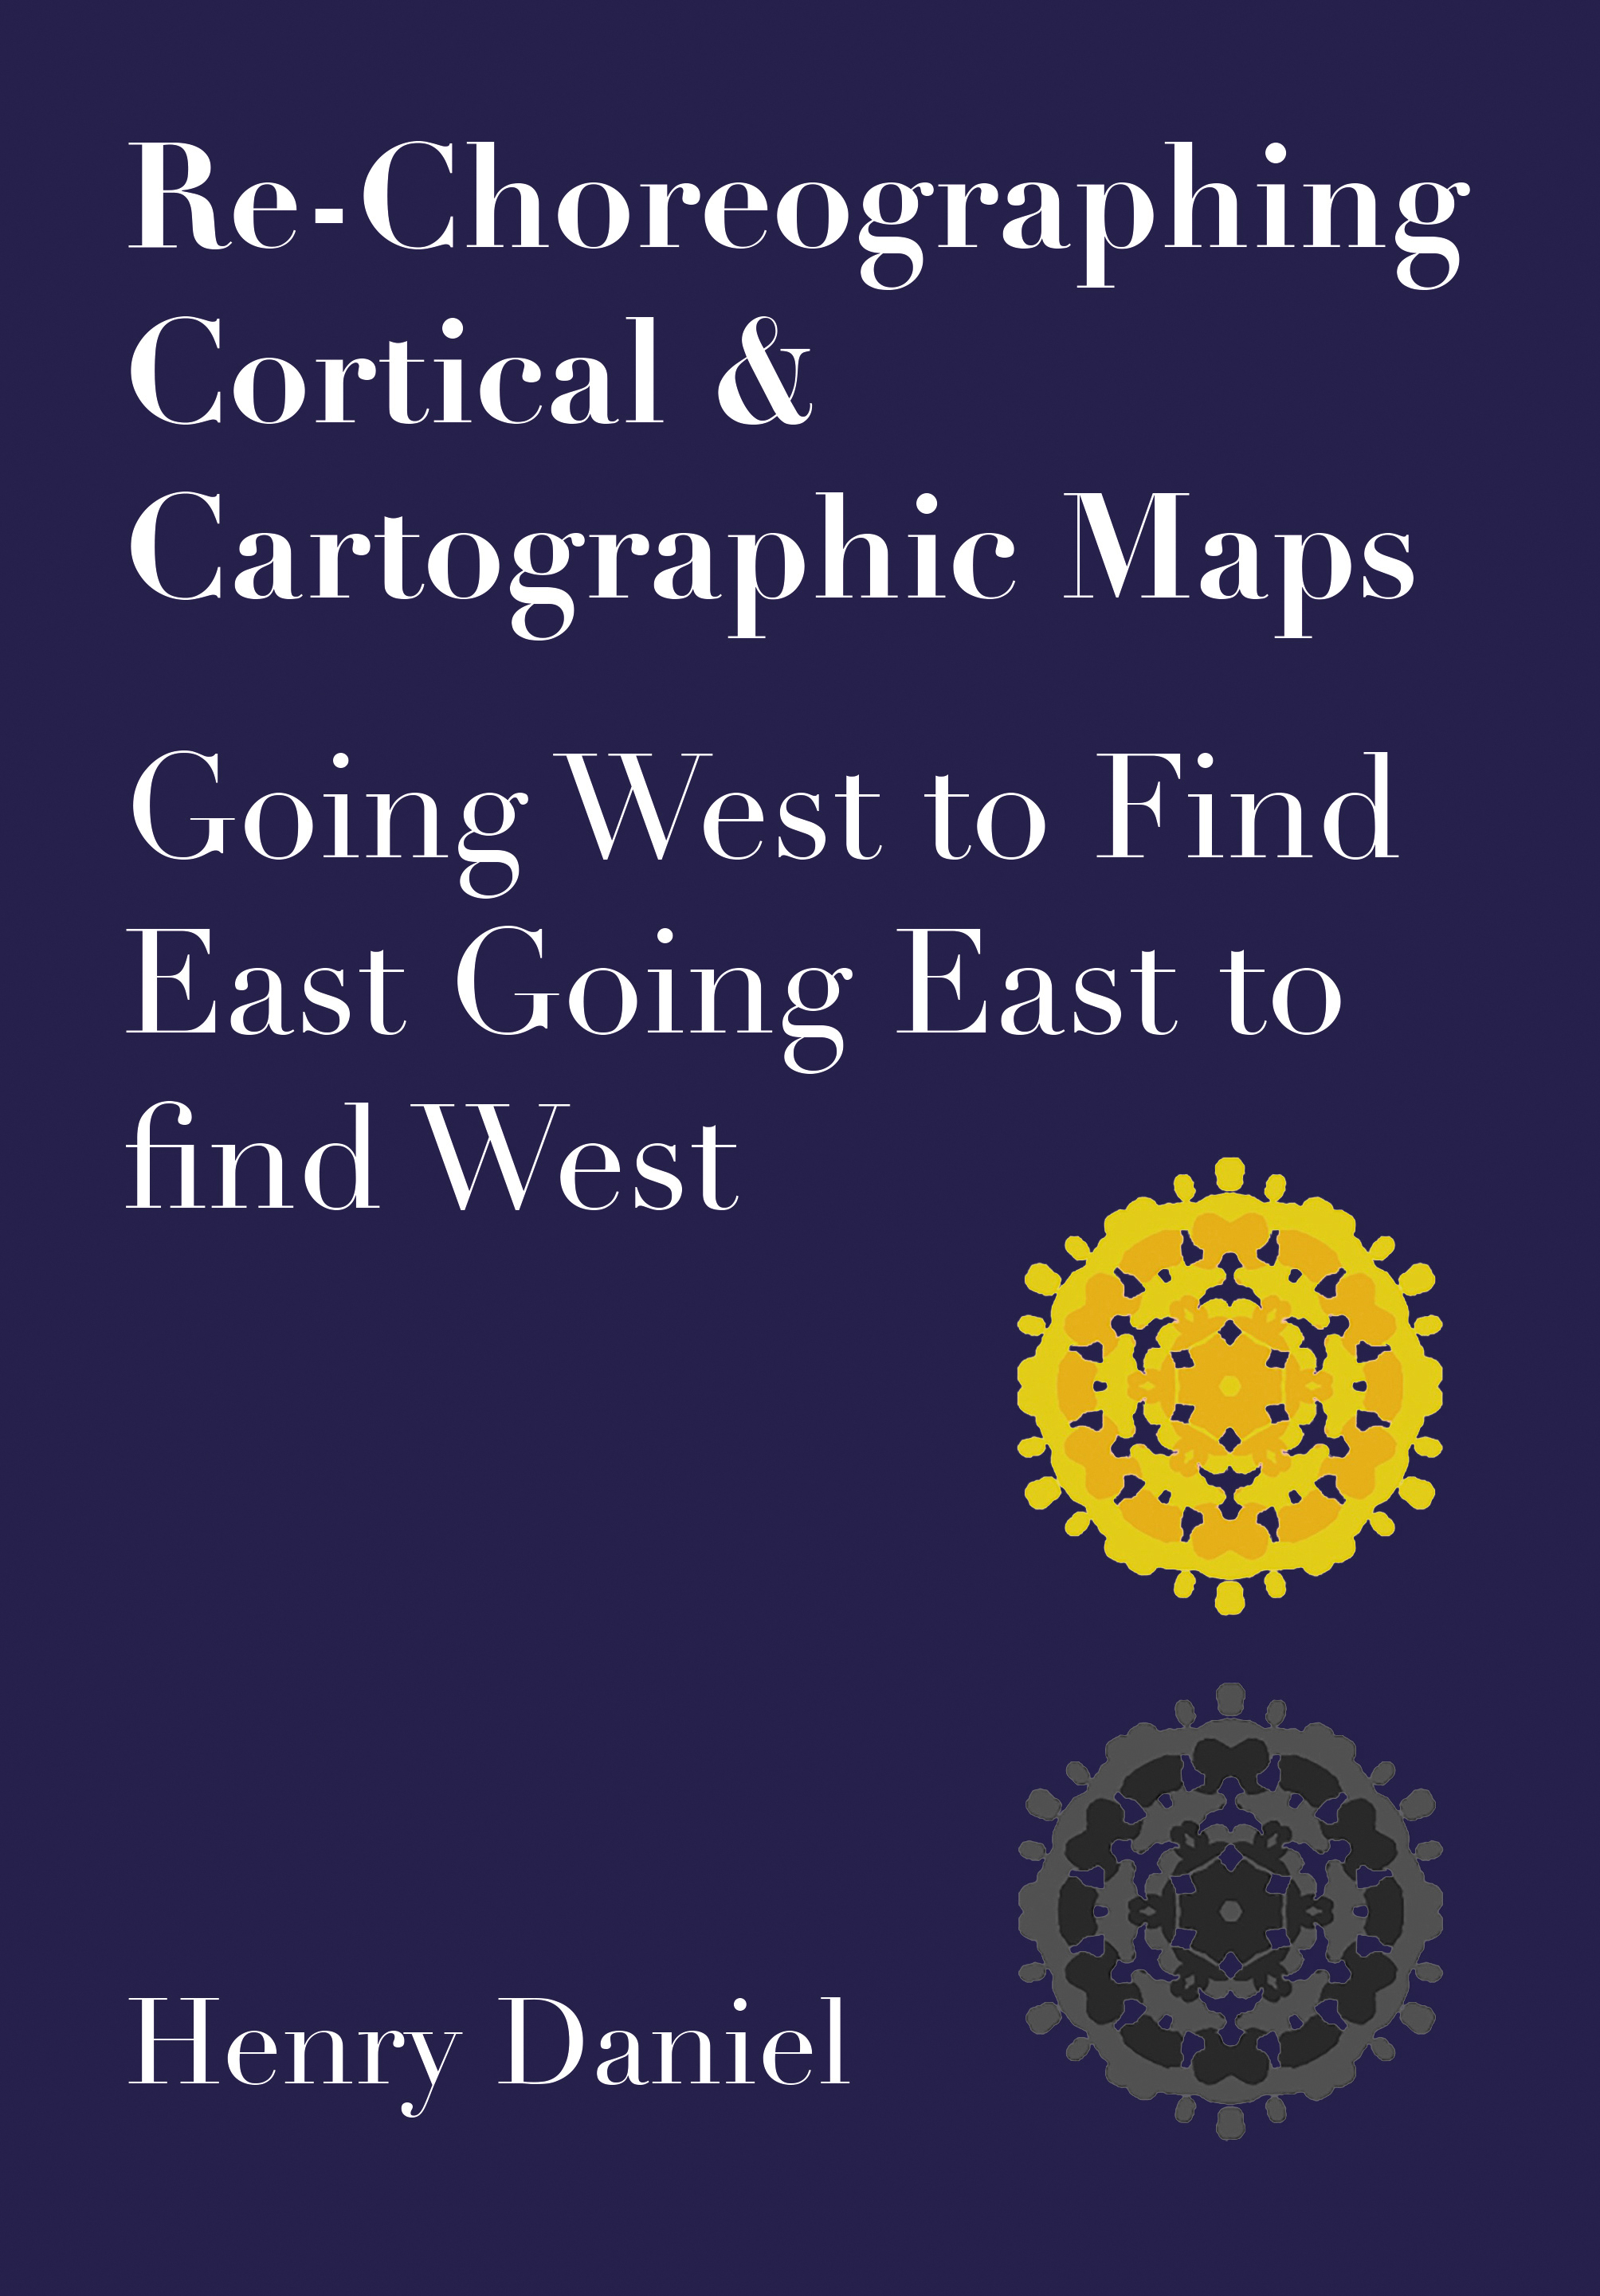 image of Re-Choreographing Cortical & Cartographic Maps